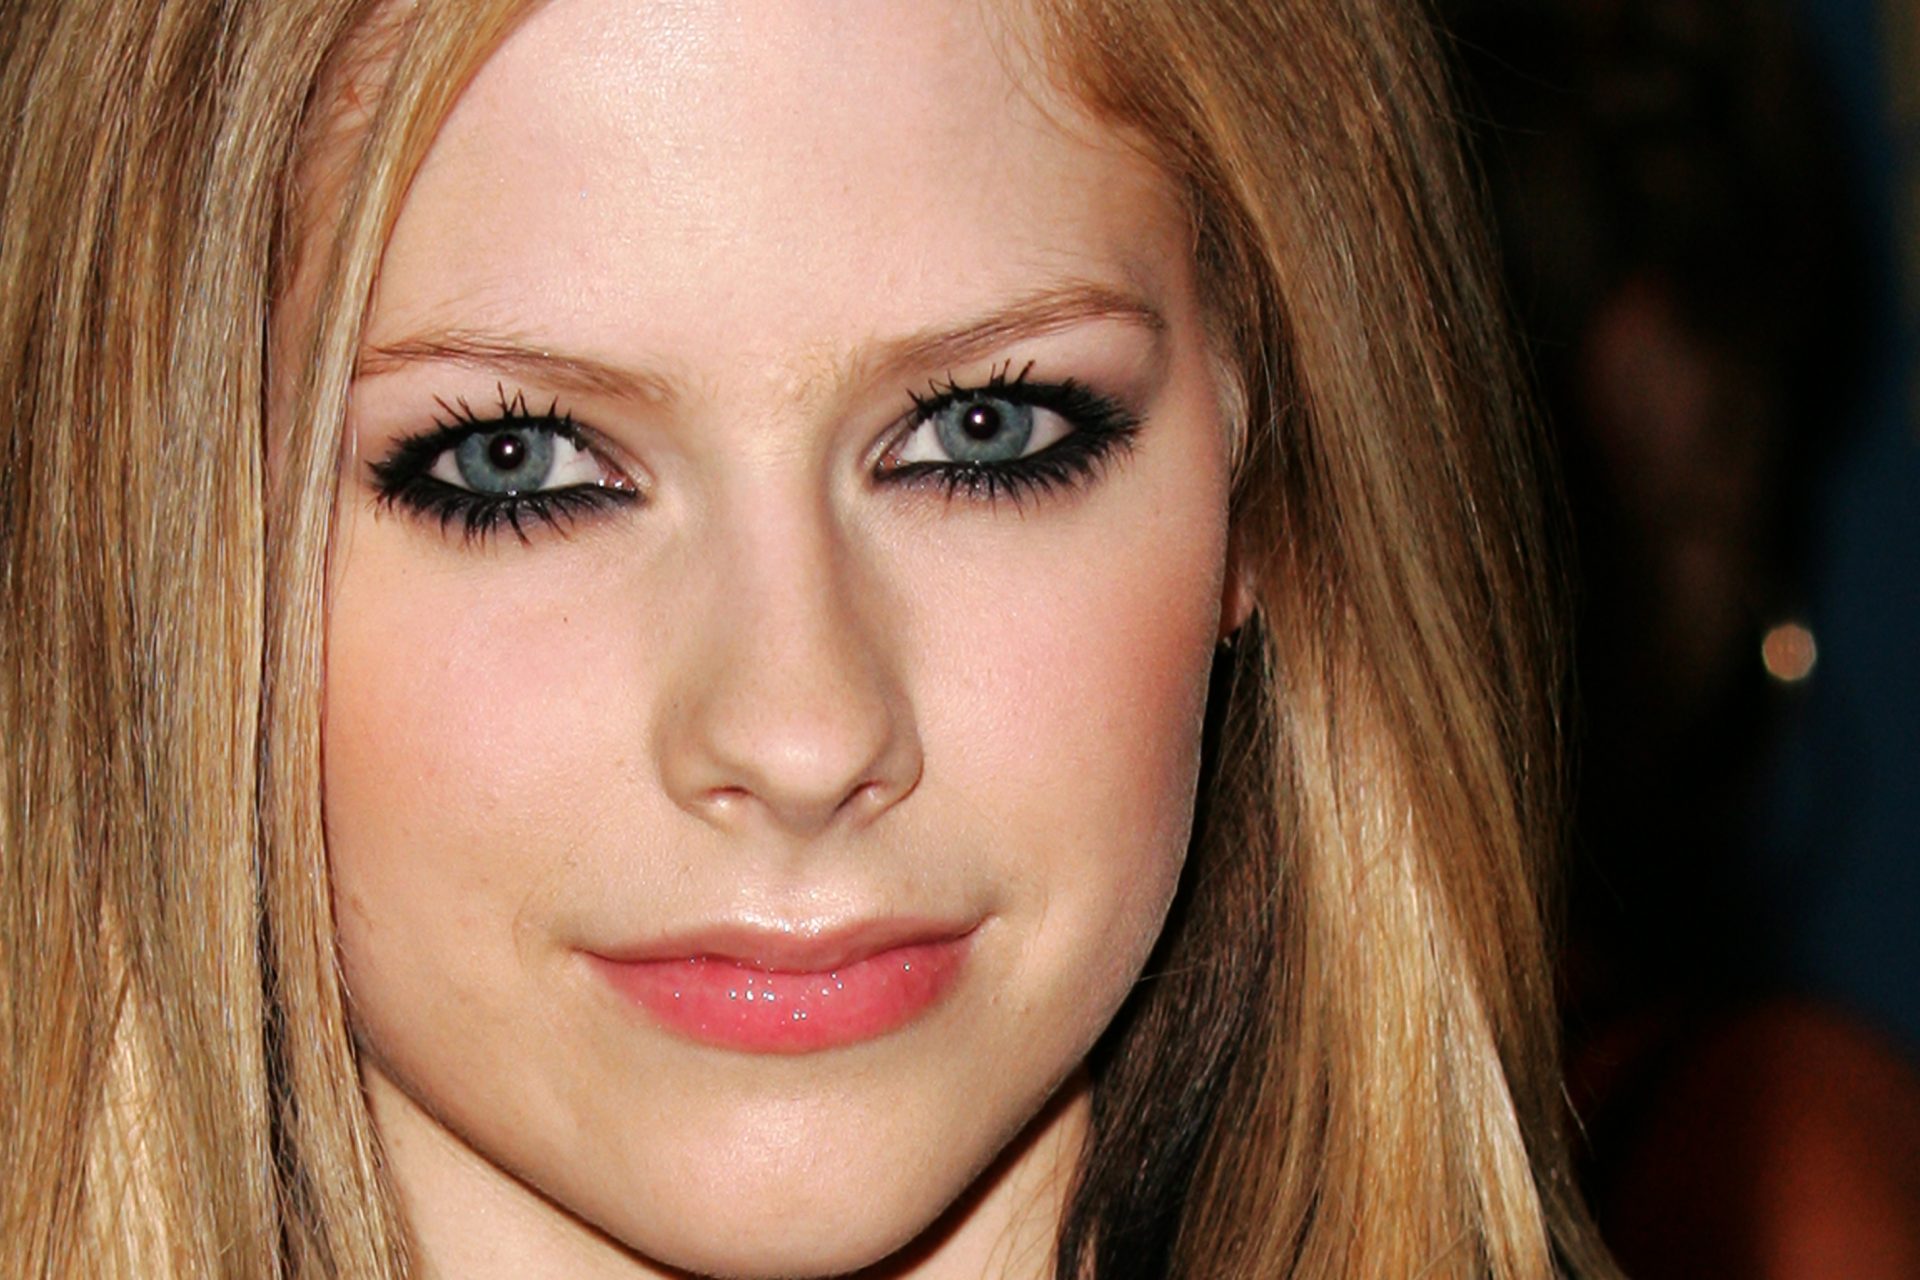 Avril is not Avril... or is she? A crazy theory about her rumored death